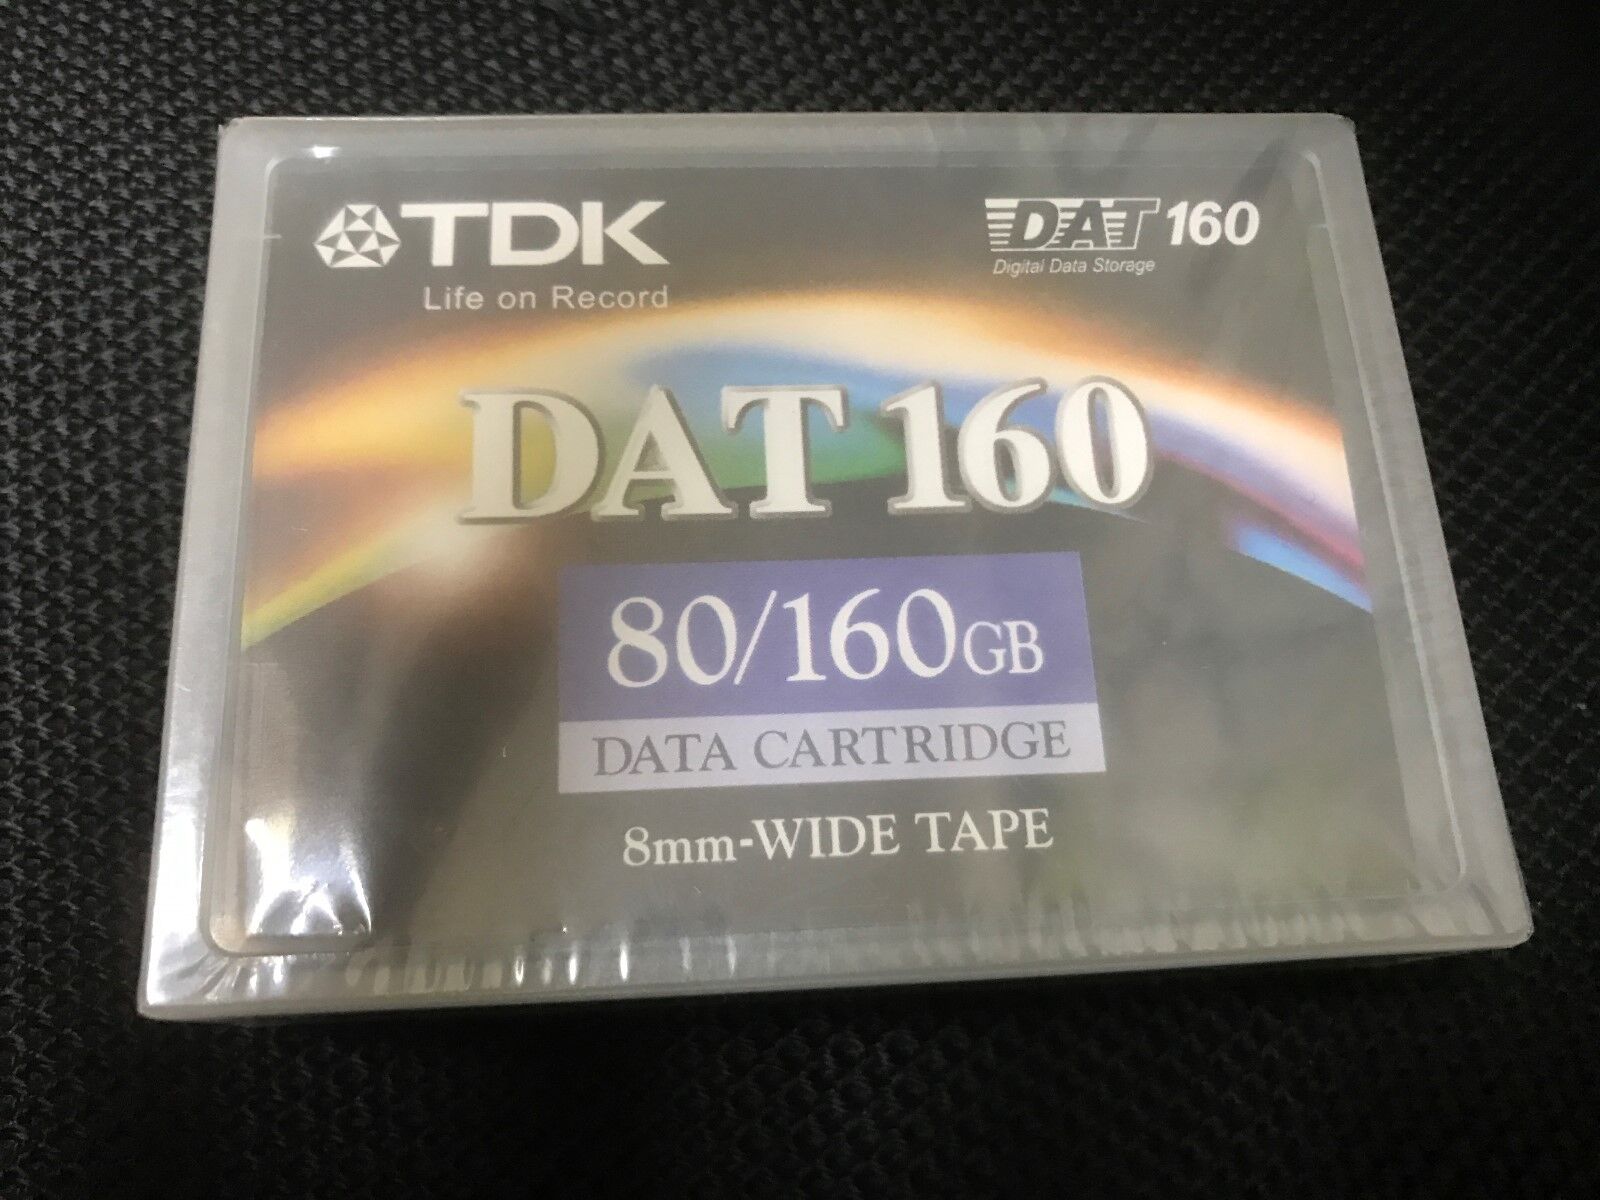 NEW TDK DATA Cartridge DAT160 DDS6 8mm wide tape 80/160GB same as C8011A